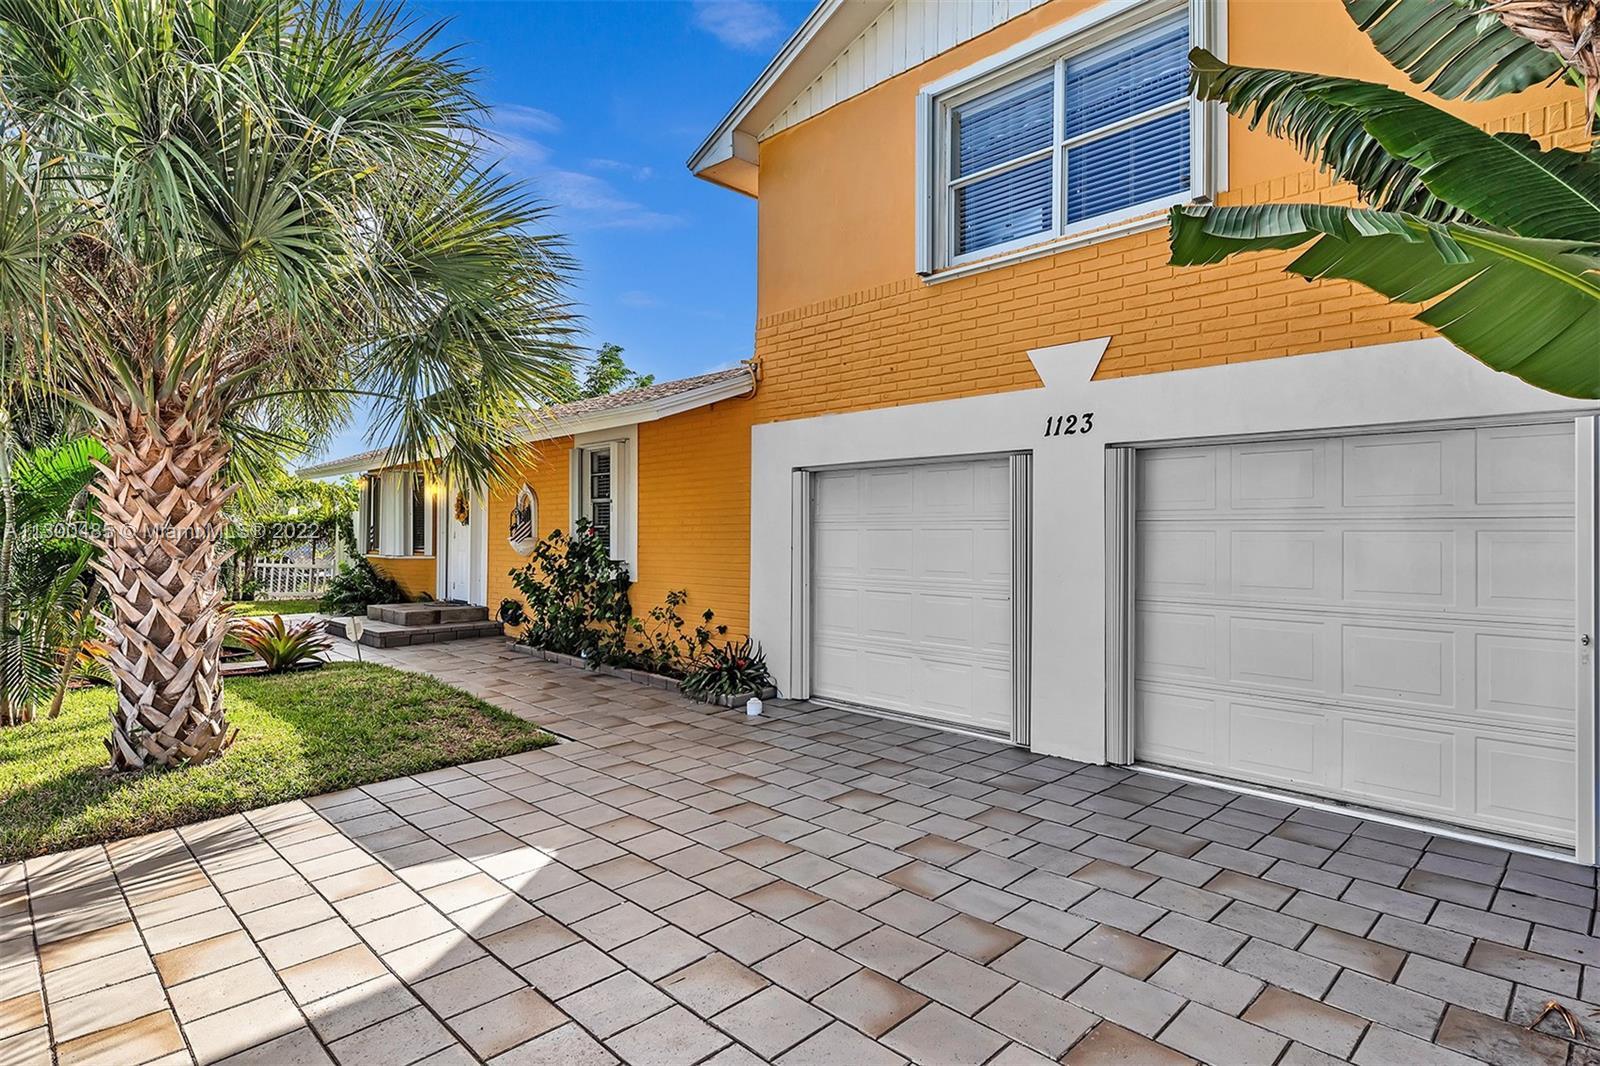 Only 5 minutes from Downtown Lake Worth, 10 minutes from South Palm Beach, and 15 minutes from Mar-A